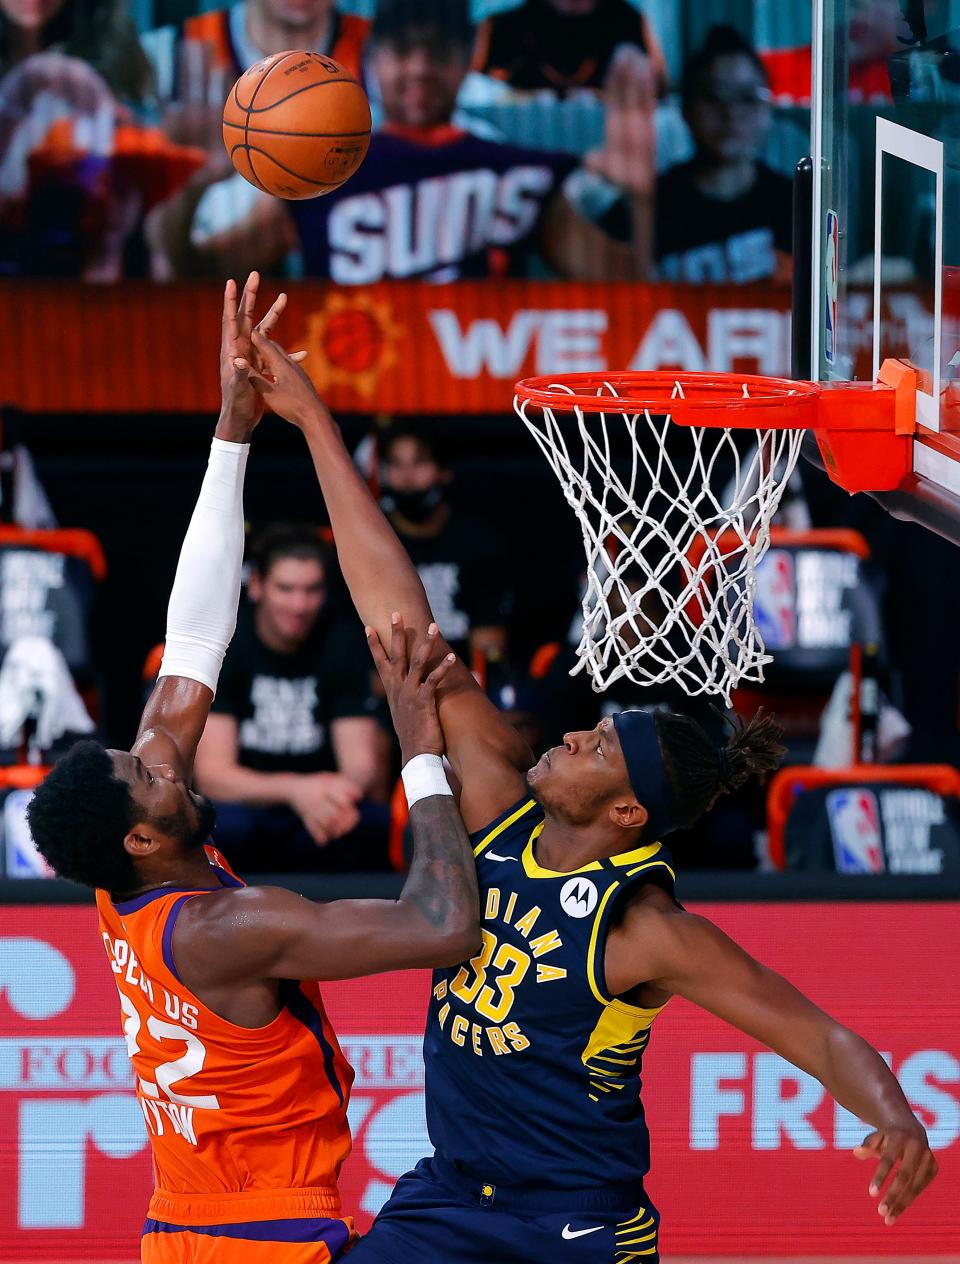 Could Deandre Ayton get traded to the Indiana Pacers? A lot of rumors and speculation surround the Phoenix Suns and that team.